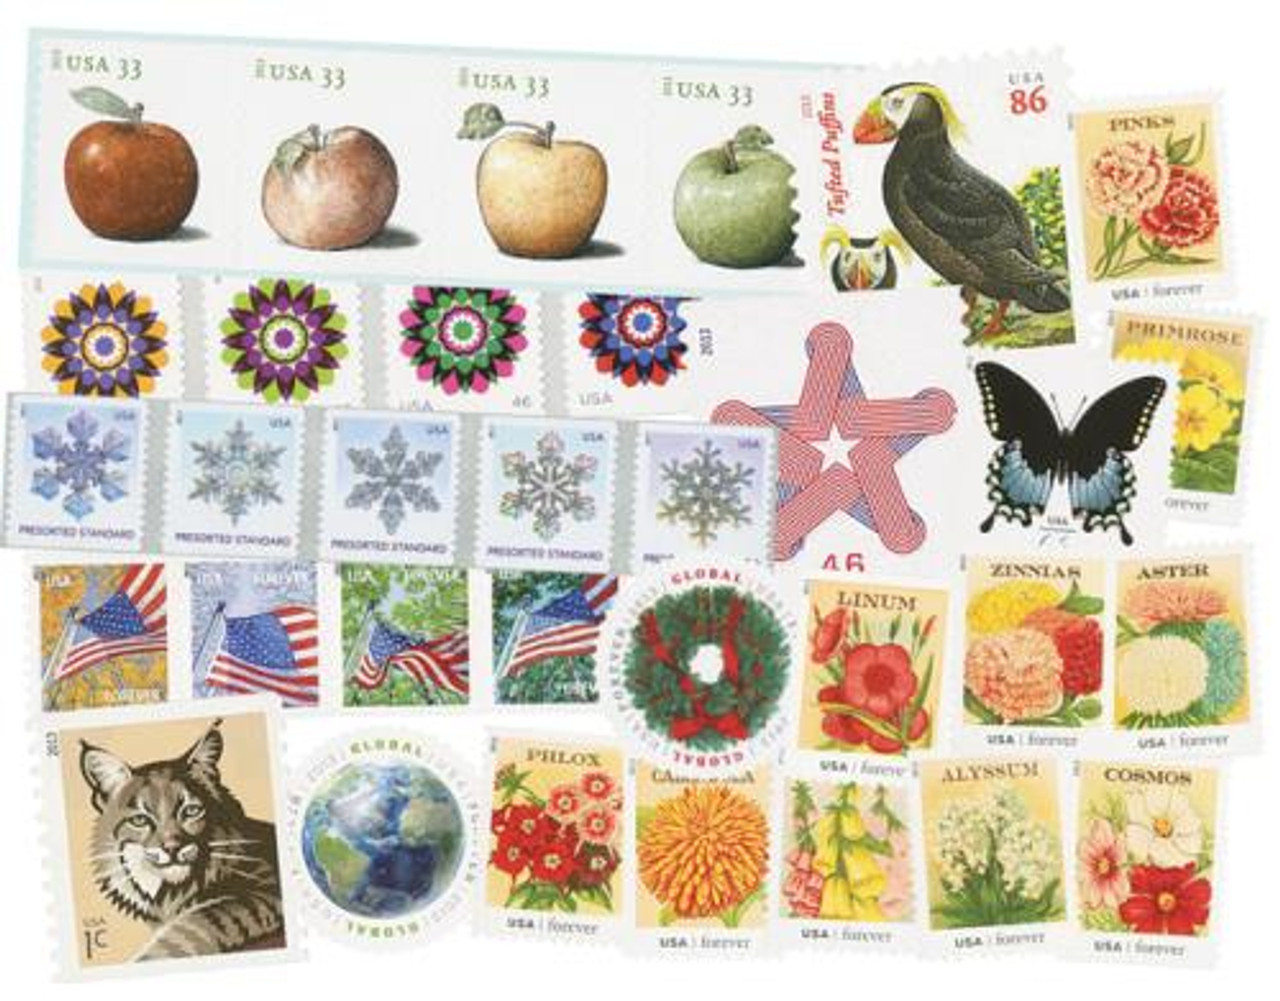 4774 - 2013 First-Class Forever Stamp - A Flag for All Seasons